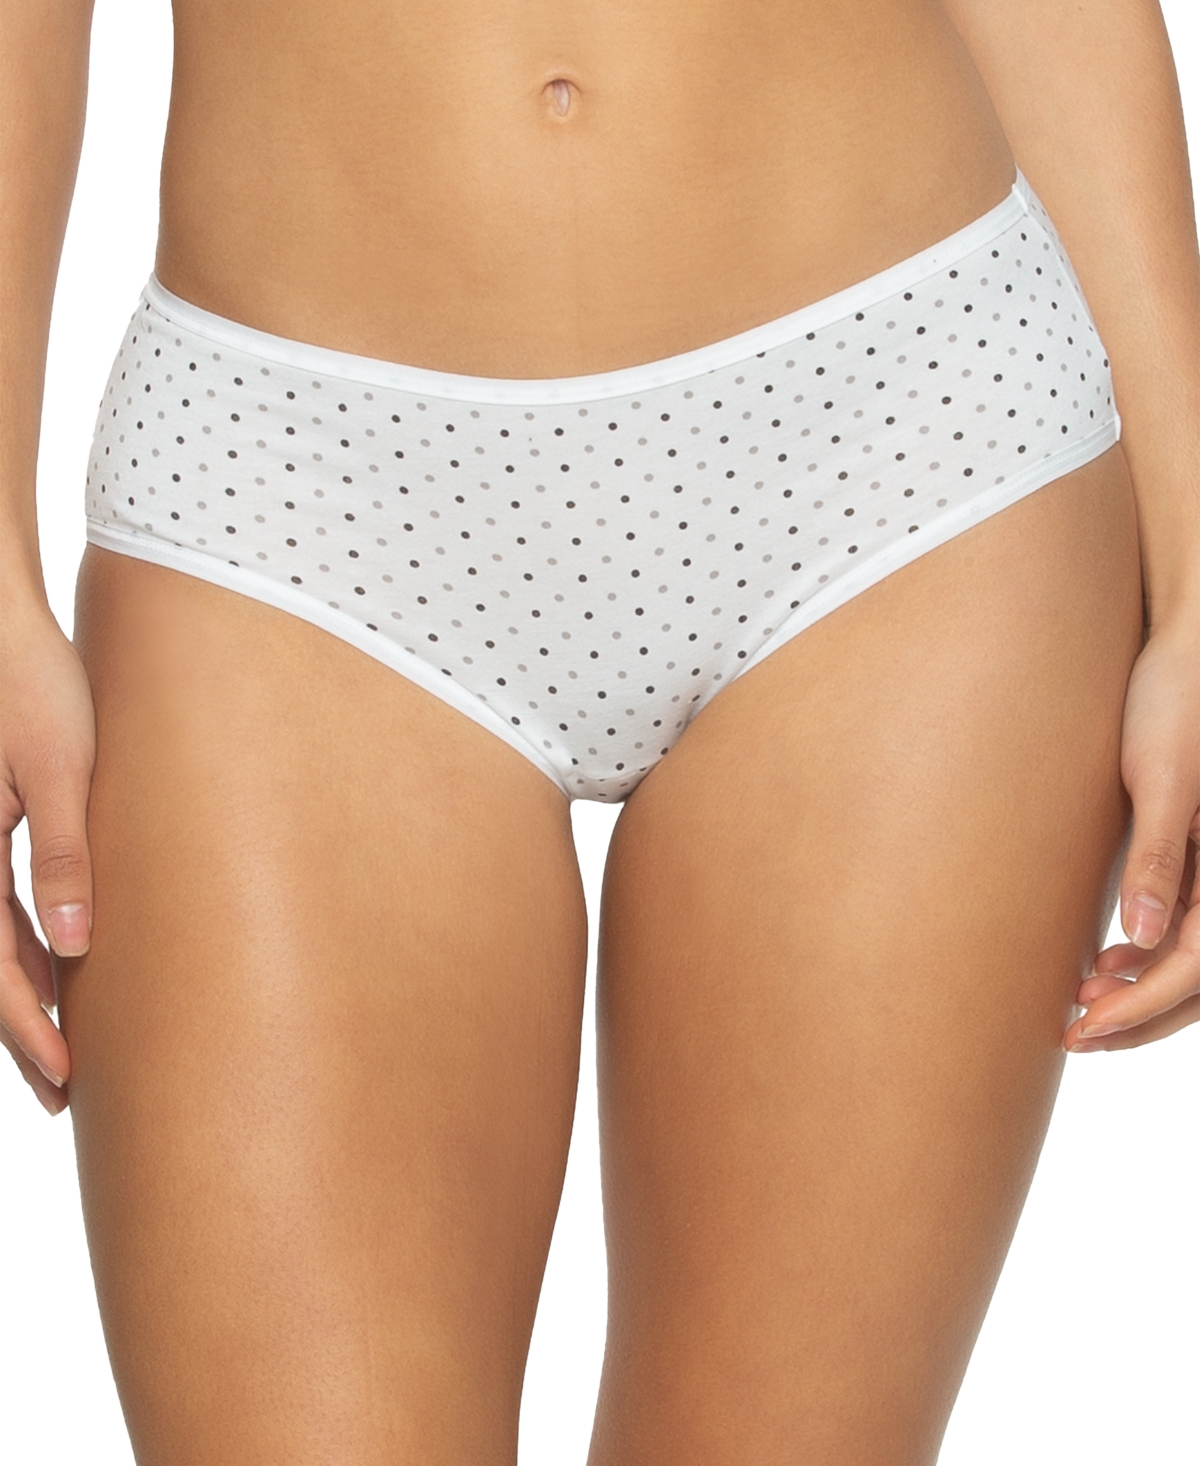 Paramour Women's 5-pk. Hipster Underwear 650180p5, Created For Macy's In Blk,hgy,wh